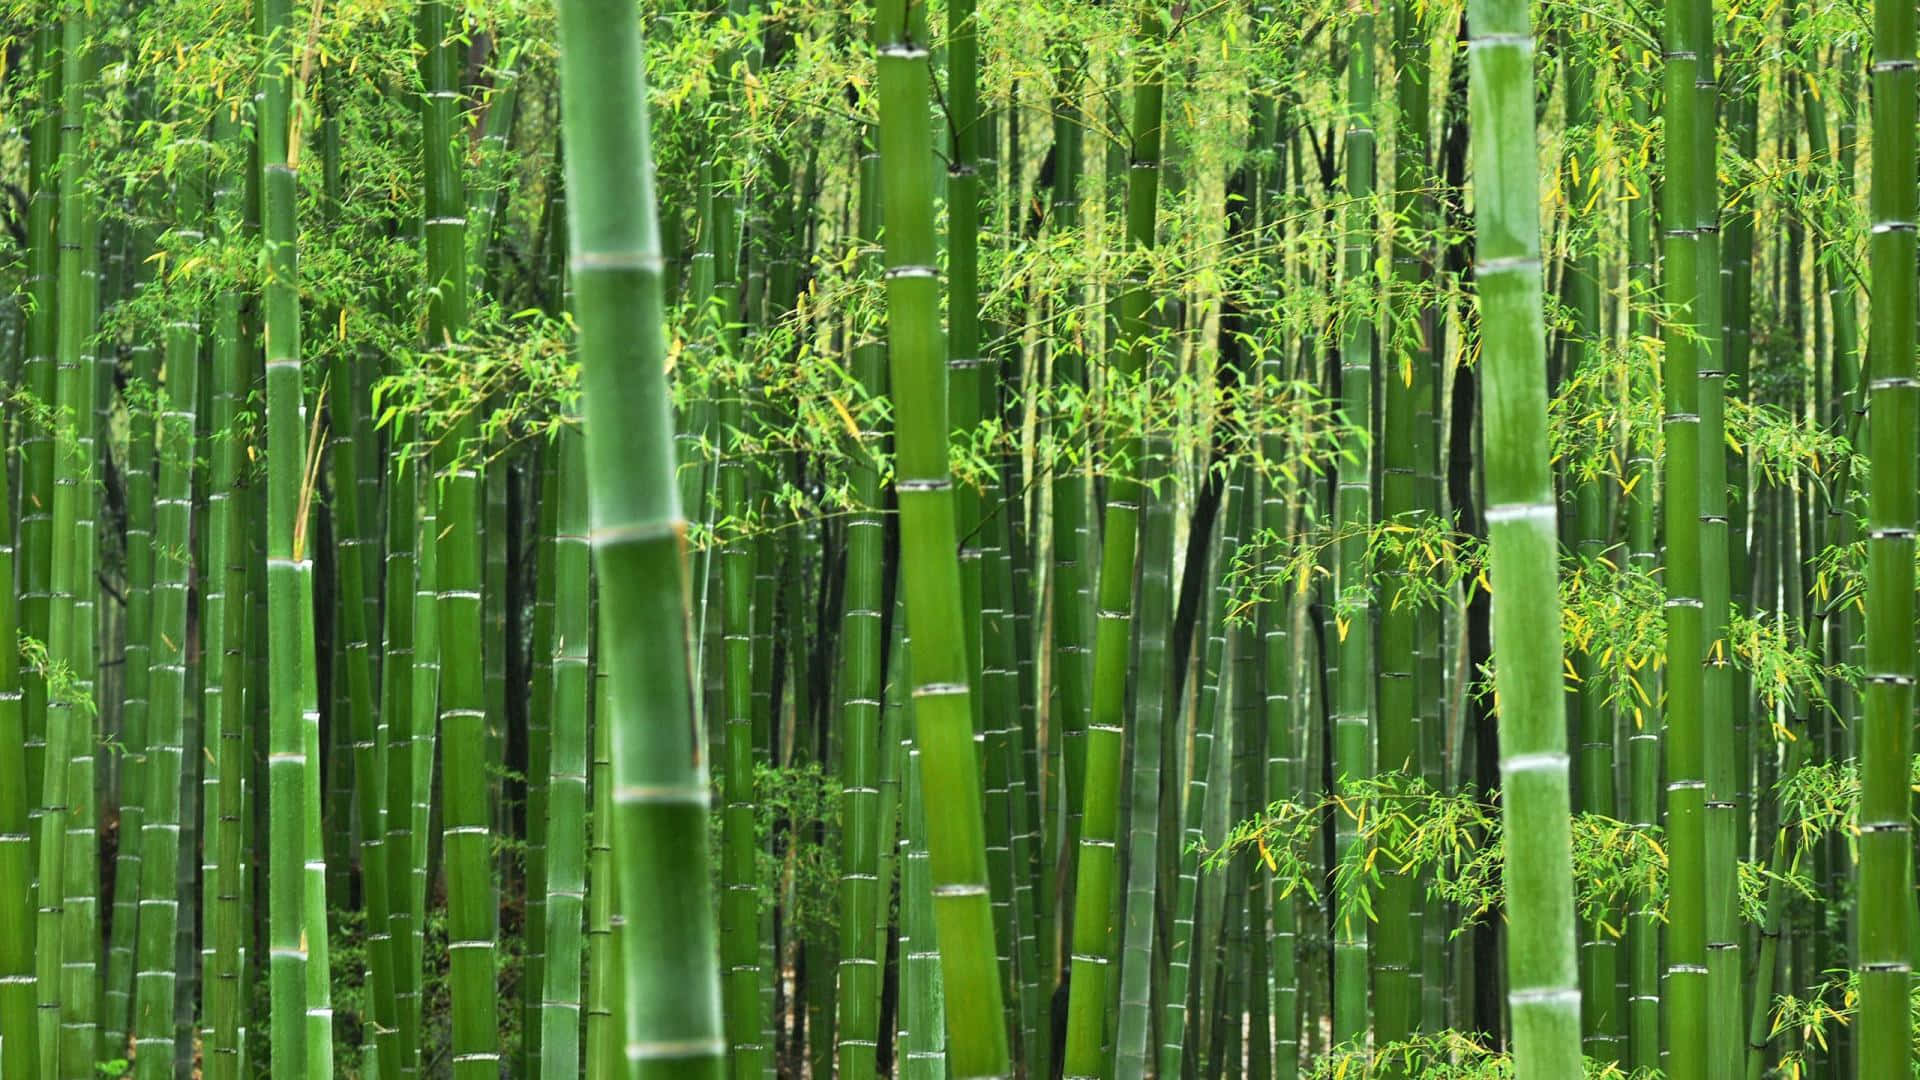 An artistic colorful backdrop of tall Bamboo reeds